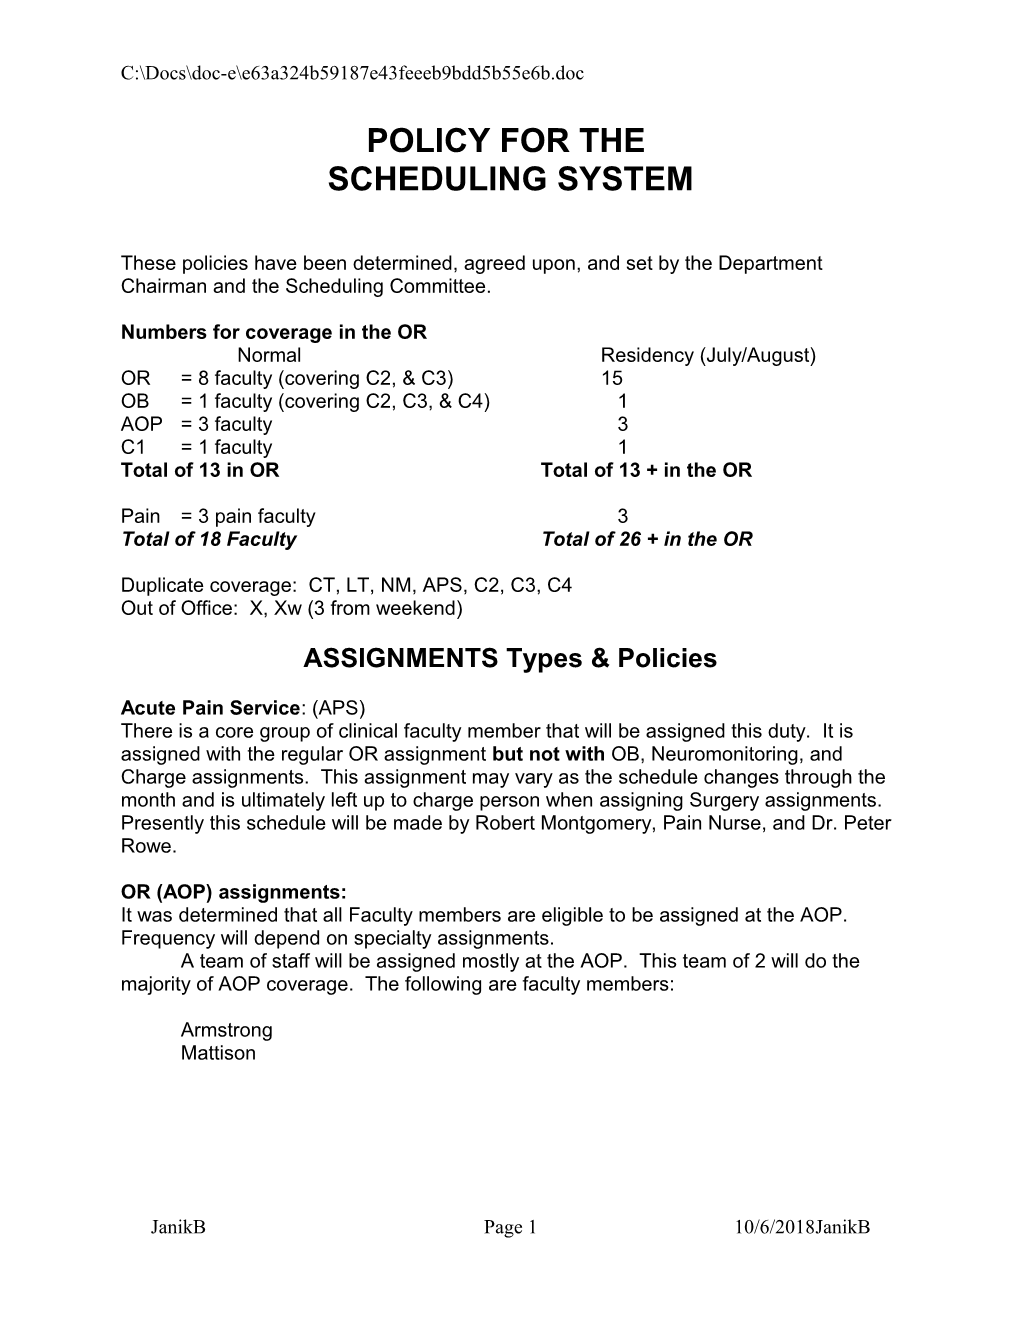 Policy for the Scheduling System